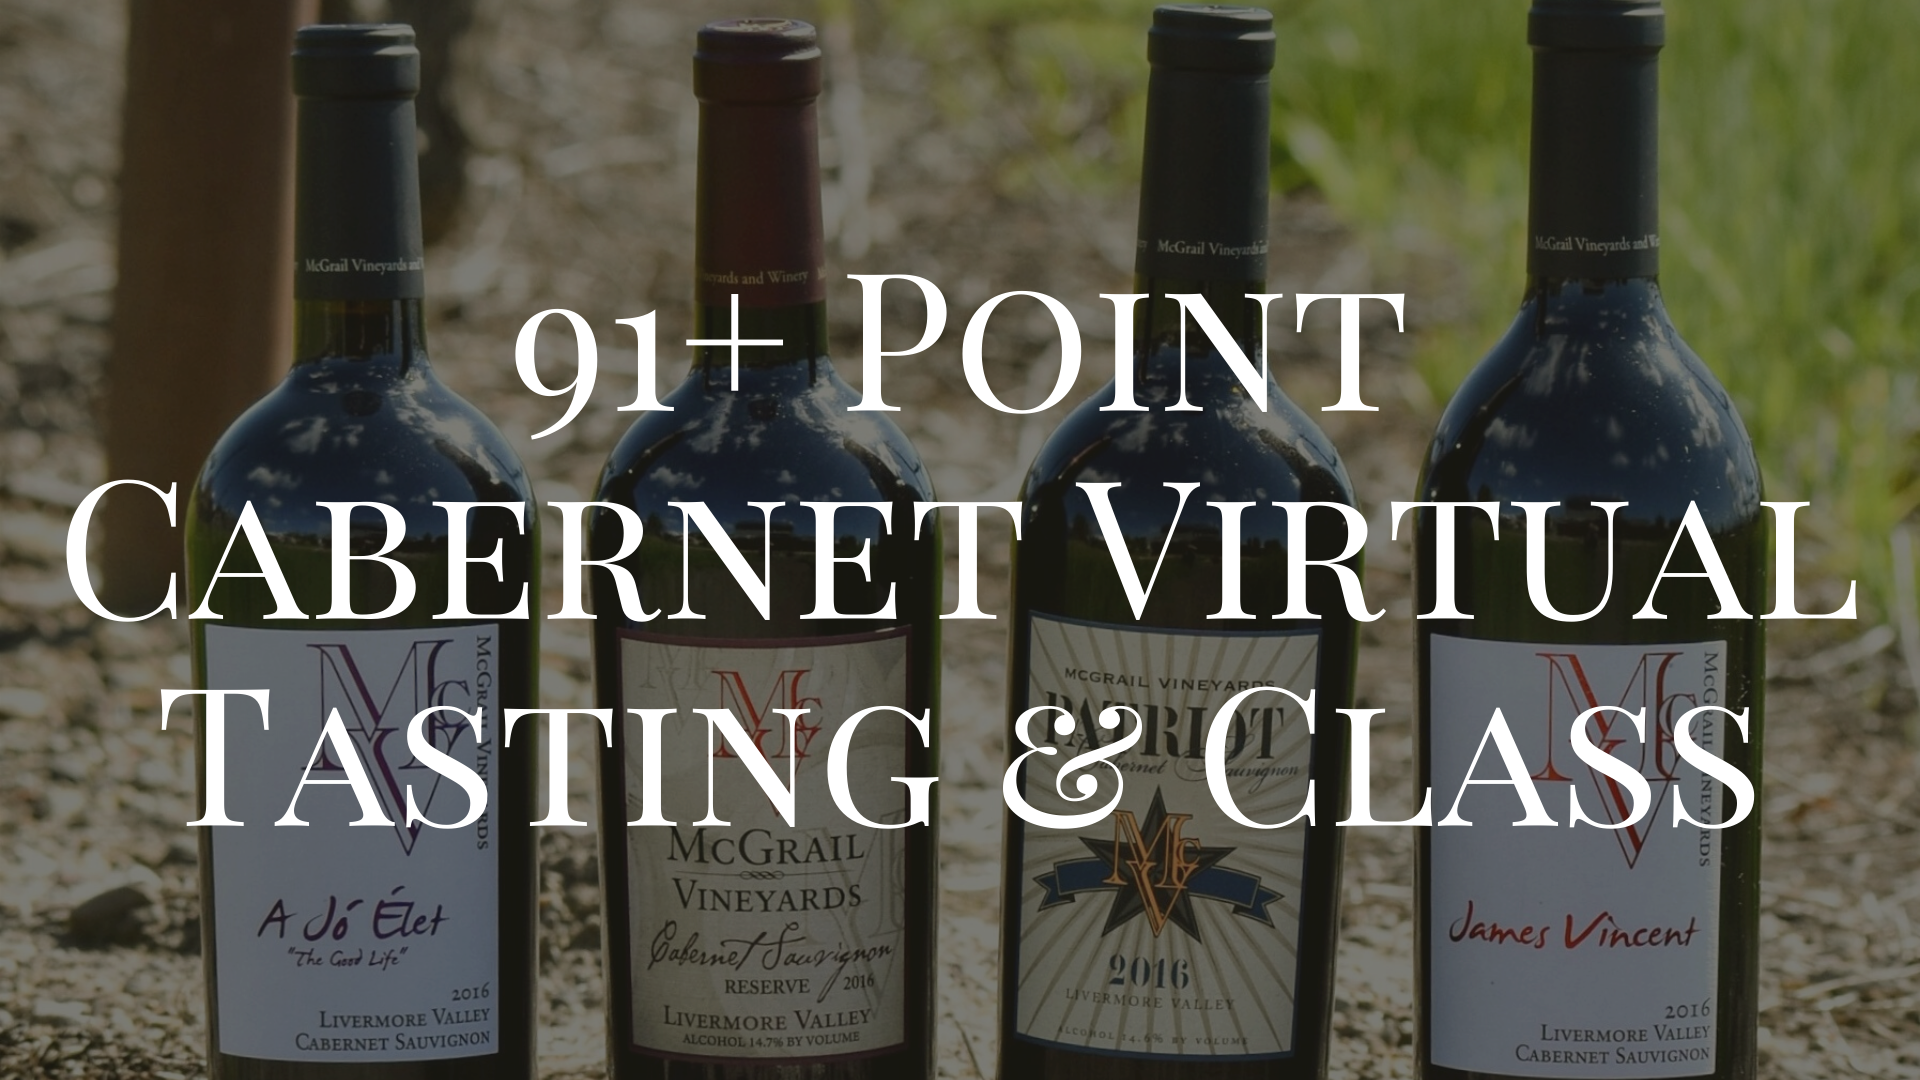 91+ Point Wine Enthusiast Cabernet Exclusive Virtual Tasting & Class with 25% OFF Winning Wine